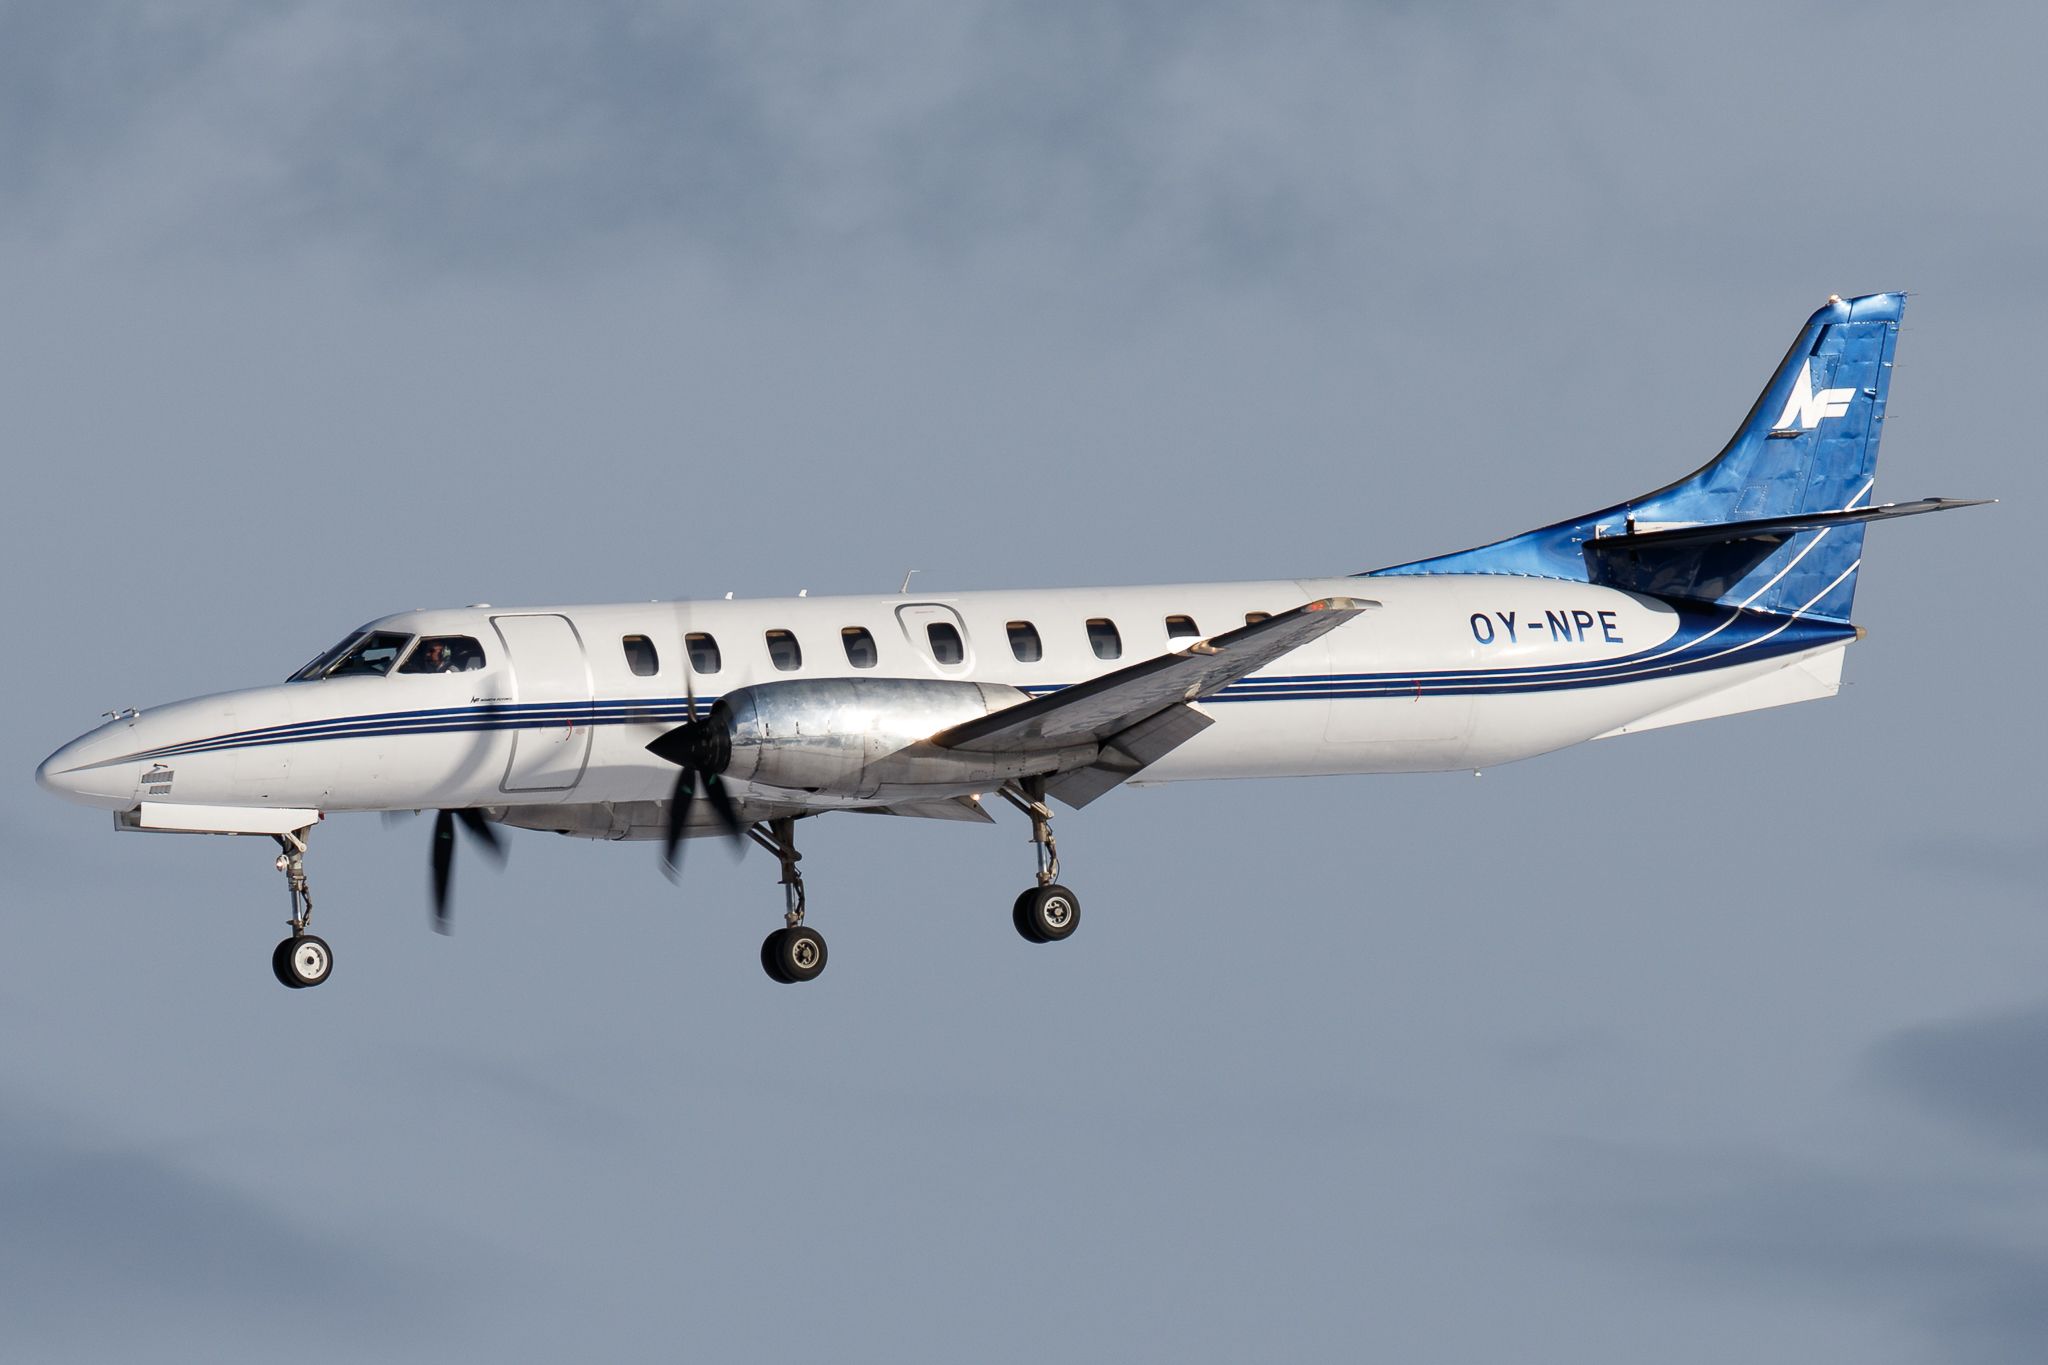 33 Years In Production: The Story Of The Fairchild Swearingen Metroliner